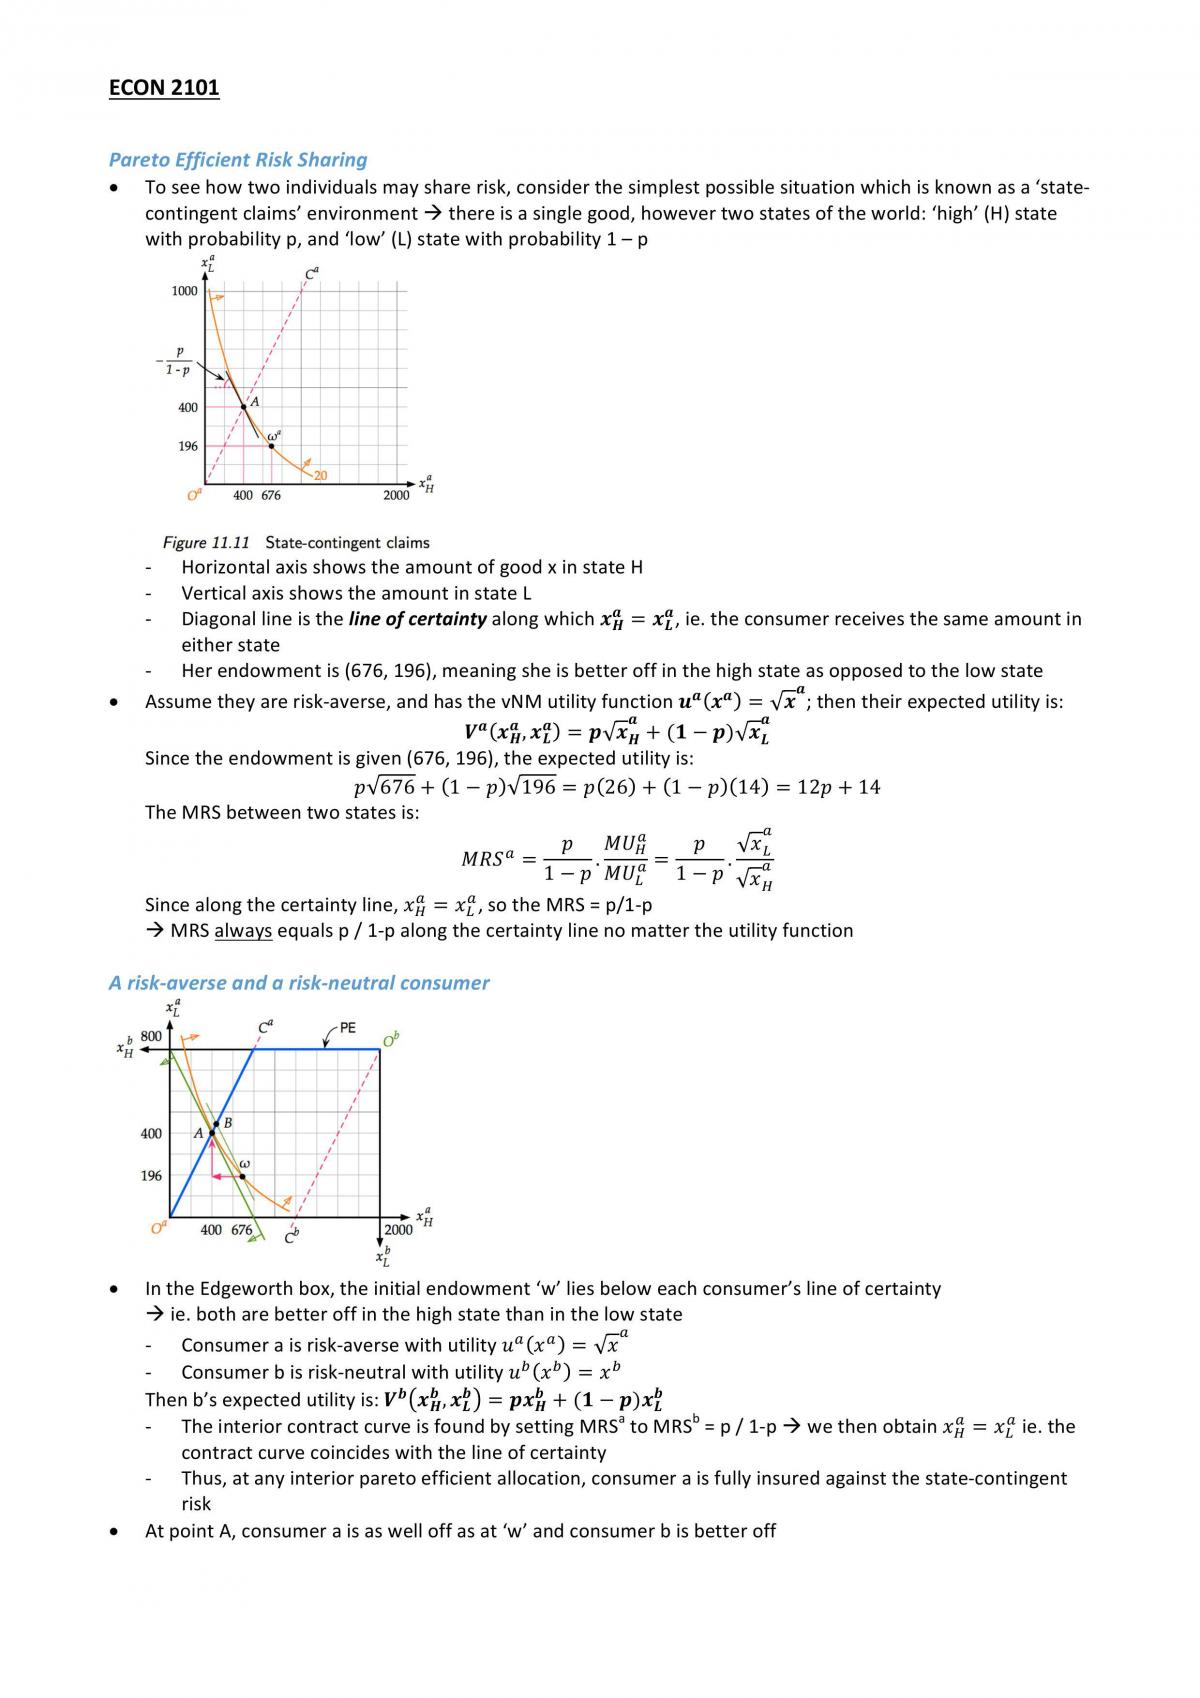 ECON2101 Notes - Page 18